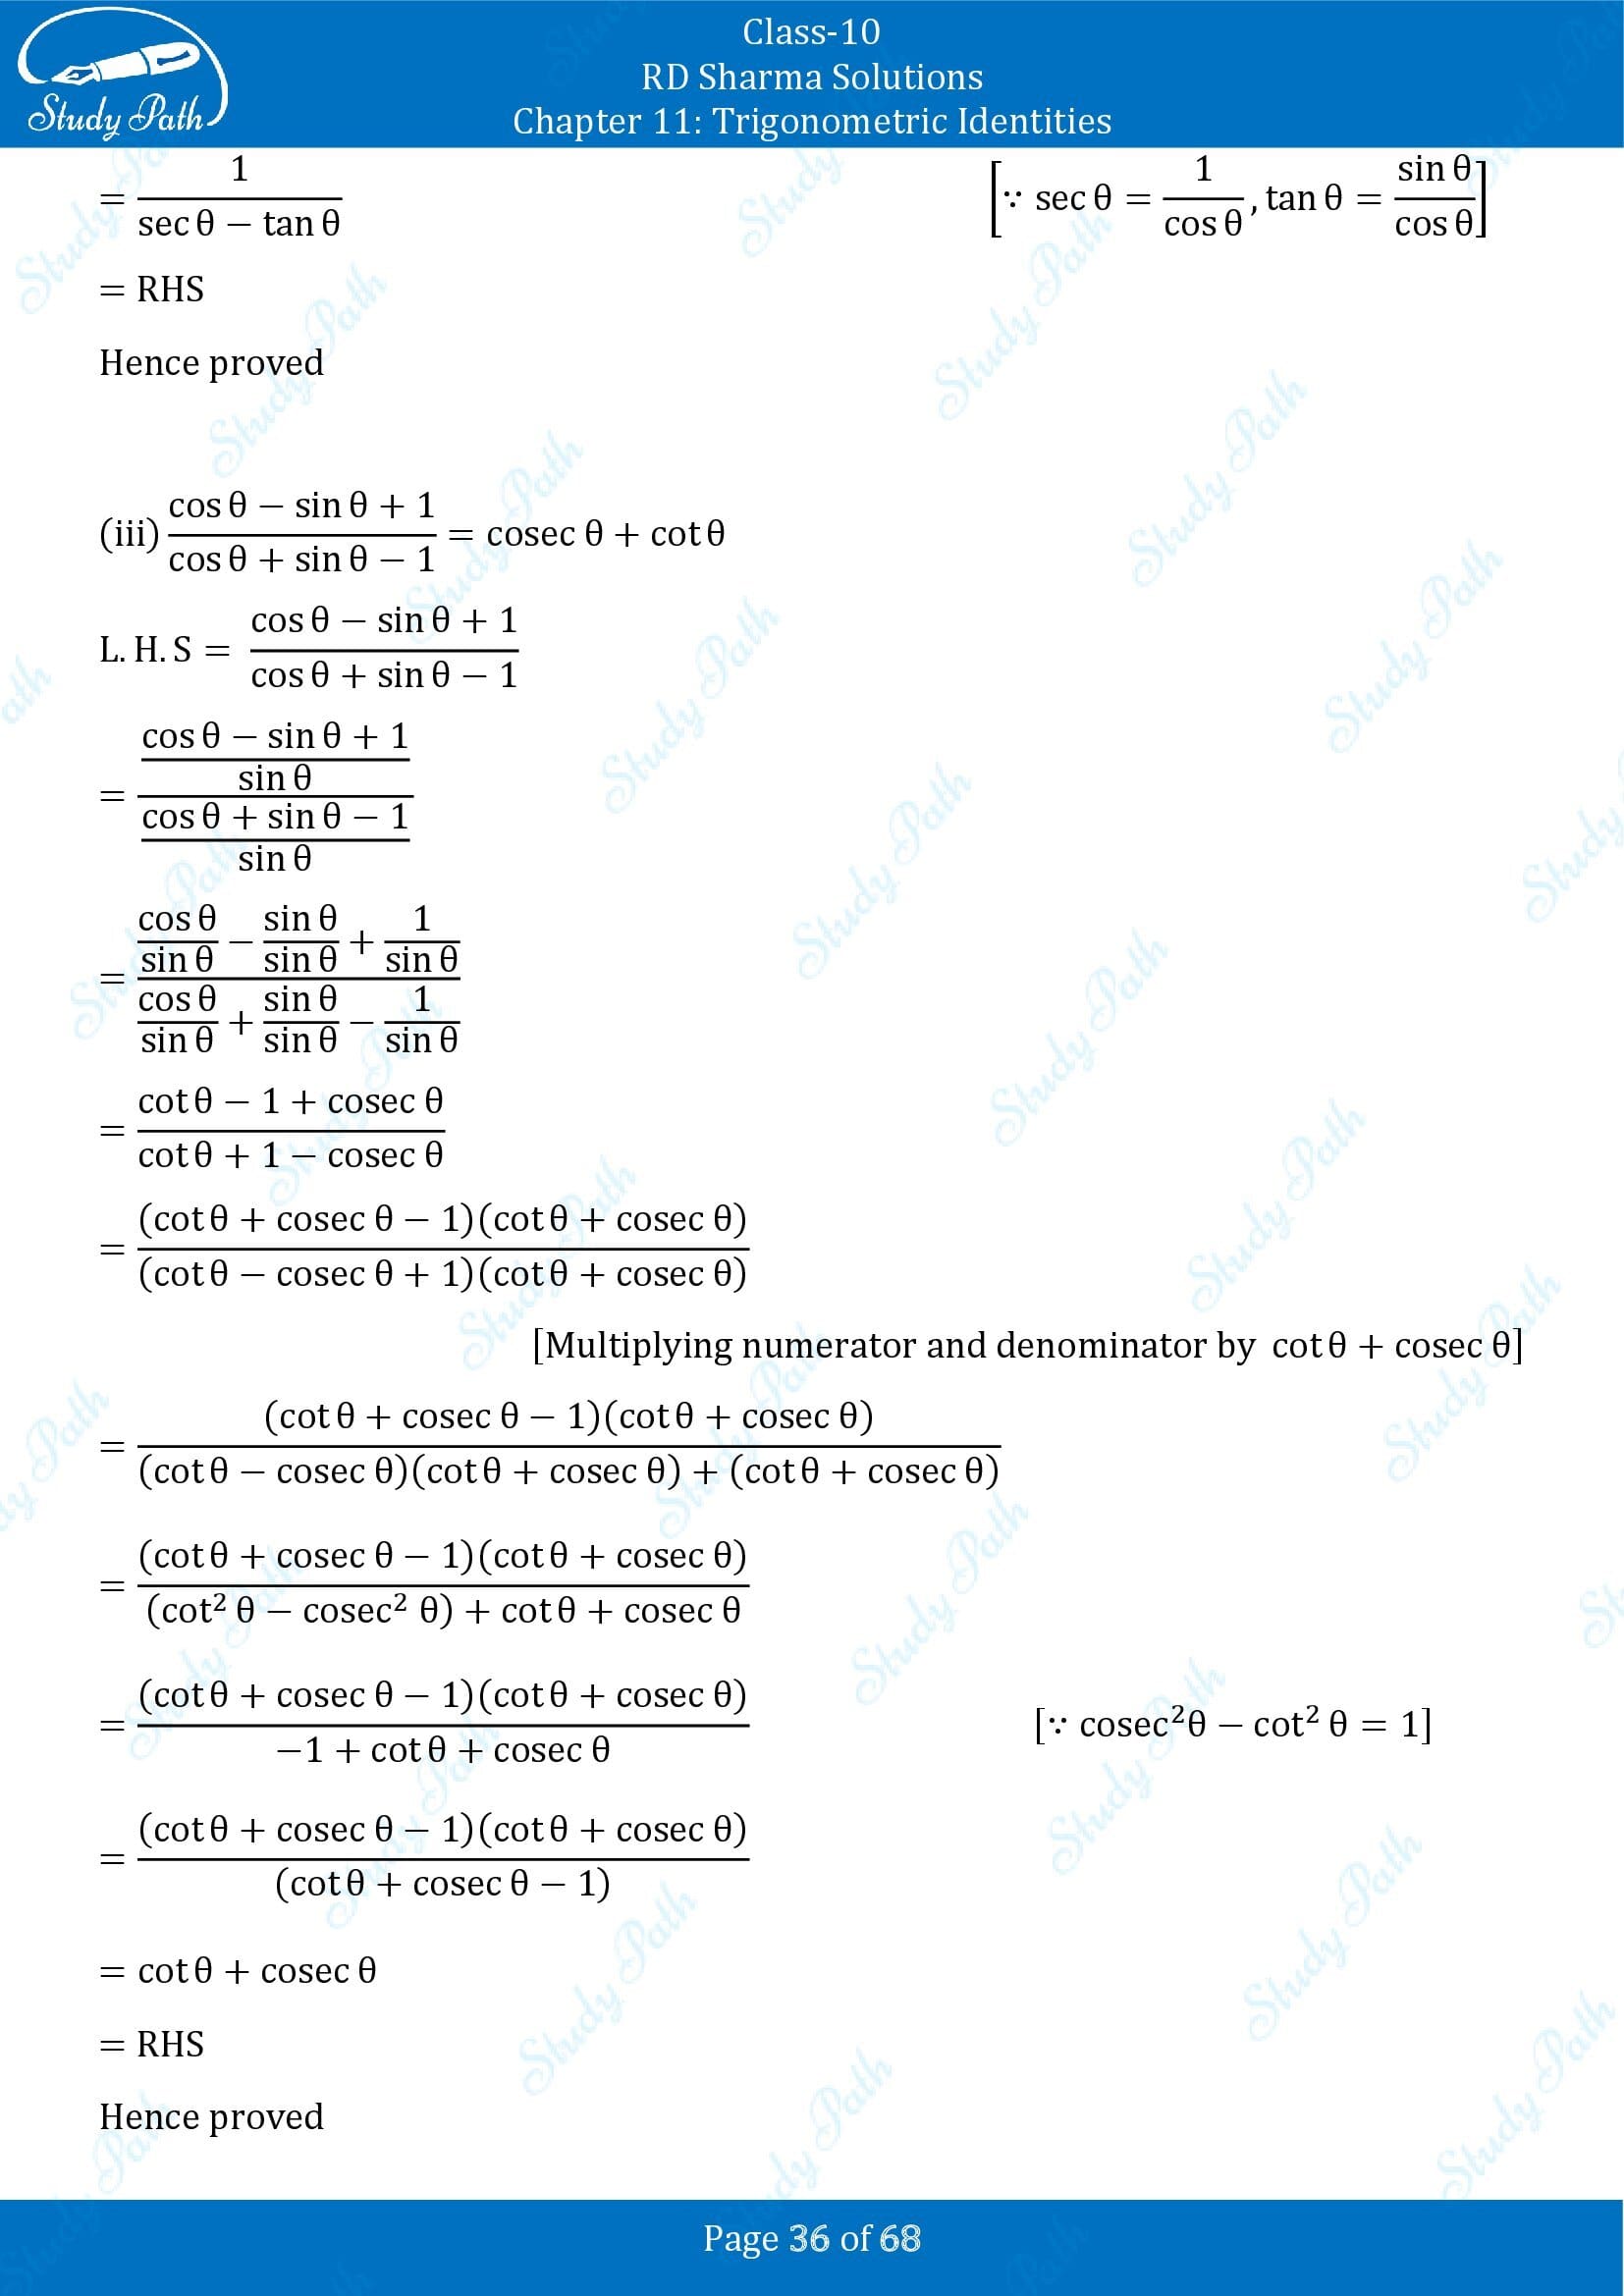 RD Sharma Solutions Class 10 Chapter 11 Trigonometric Identities Exercise 11.1 00036